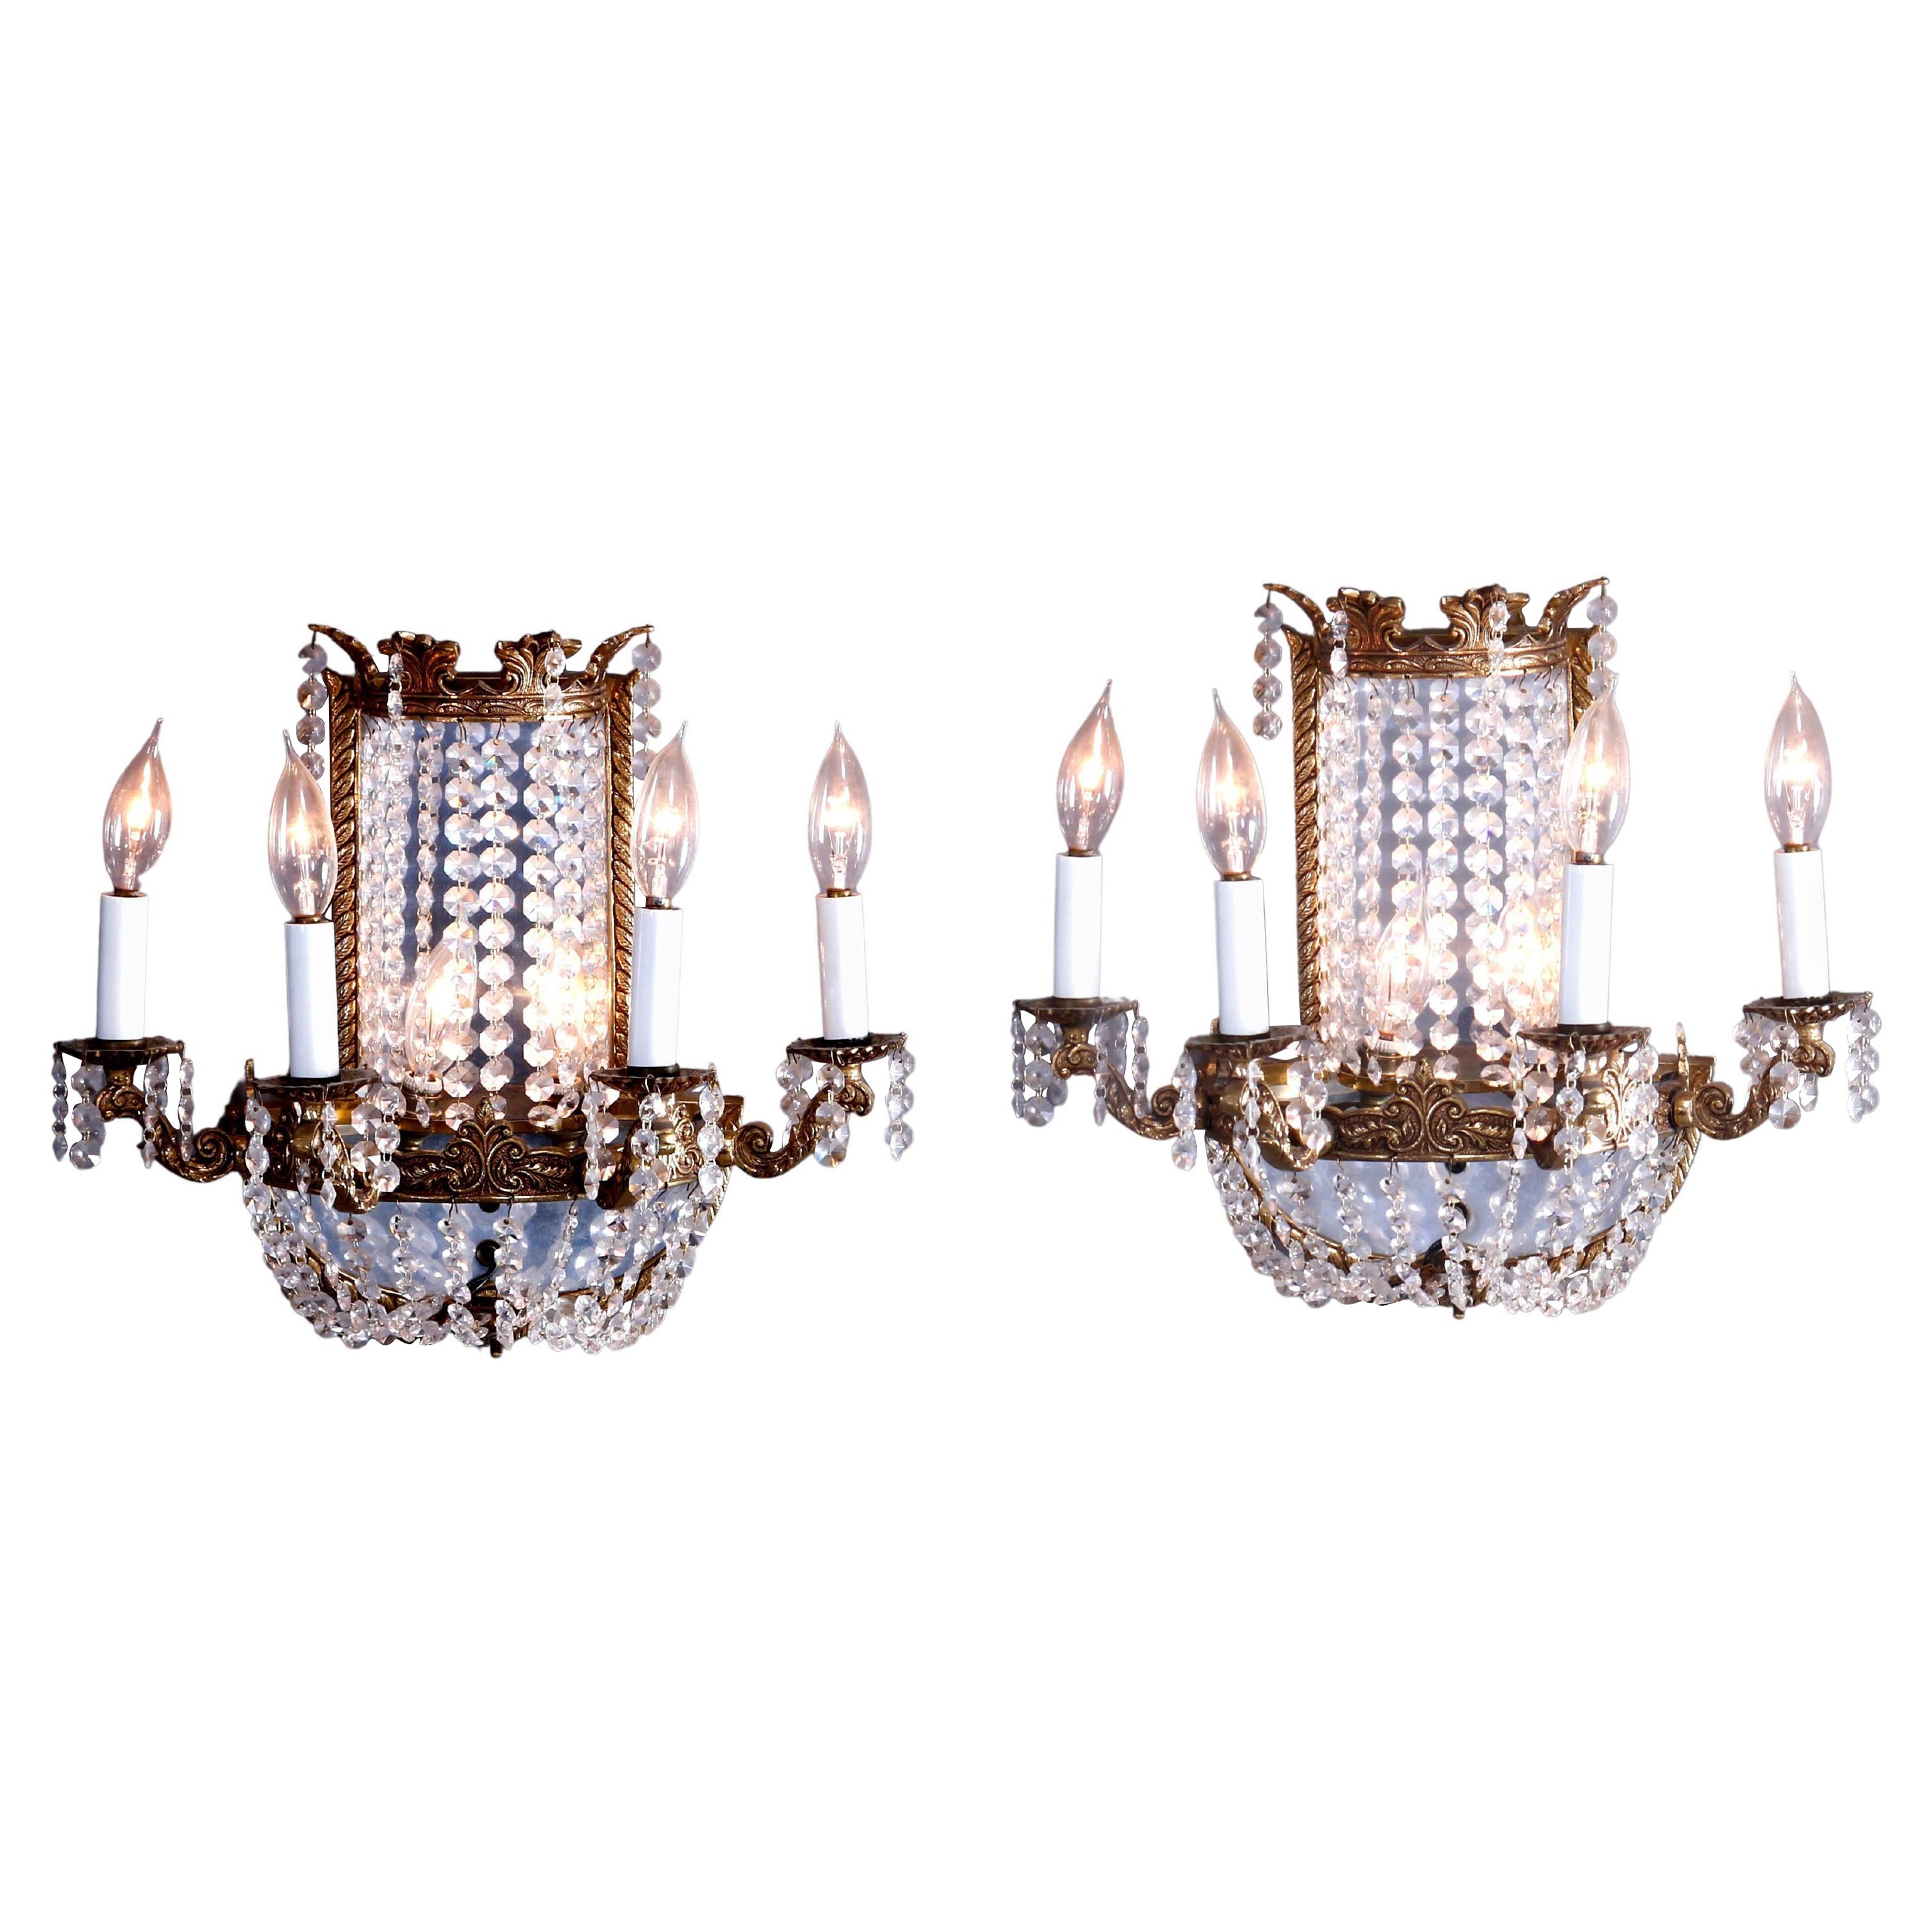 French Style Gilt Bronze & Crystal Four-Light & Mirrored Wall Sconces, 20th C